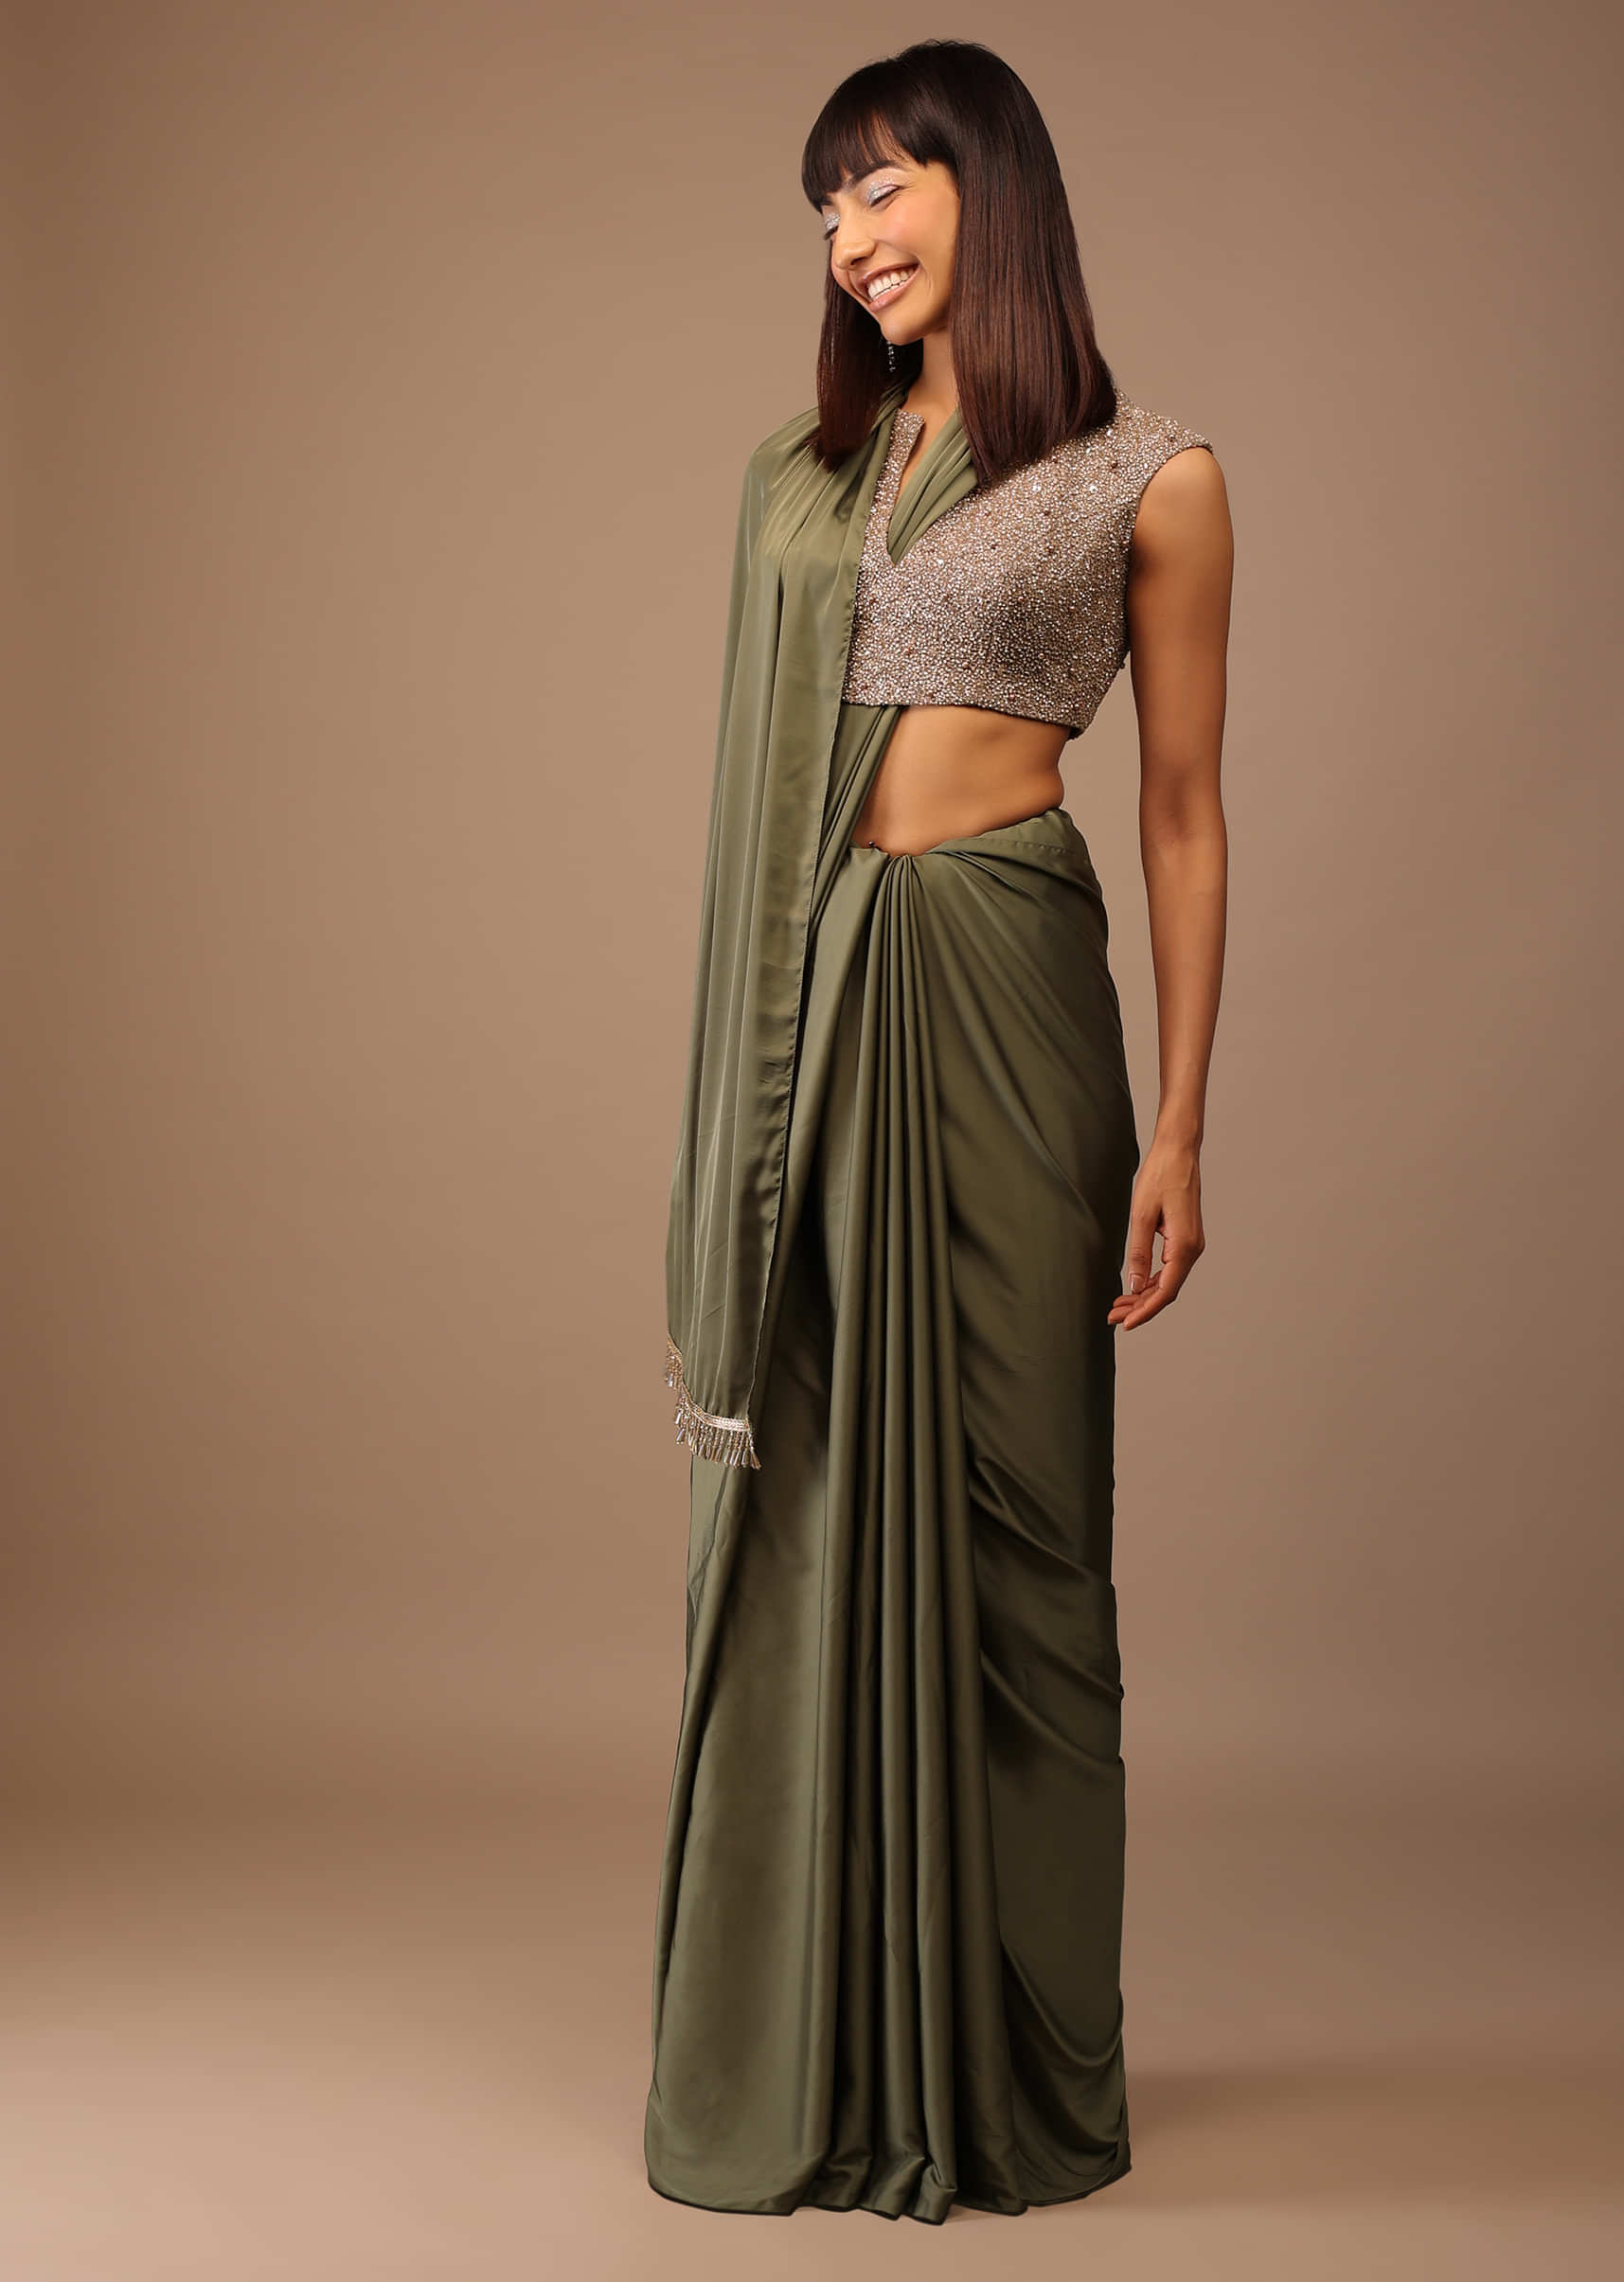 Green Satin Saree With Fringes On Pallu Paired With Deep Neck Hand Embroidered Crop Top